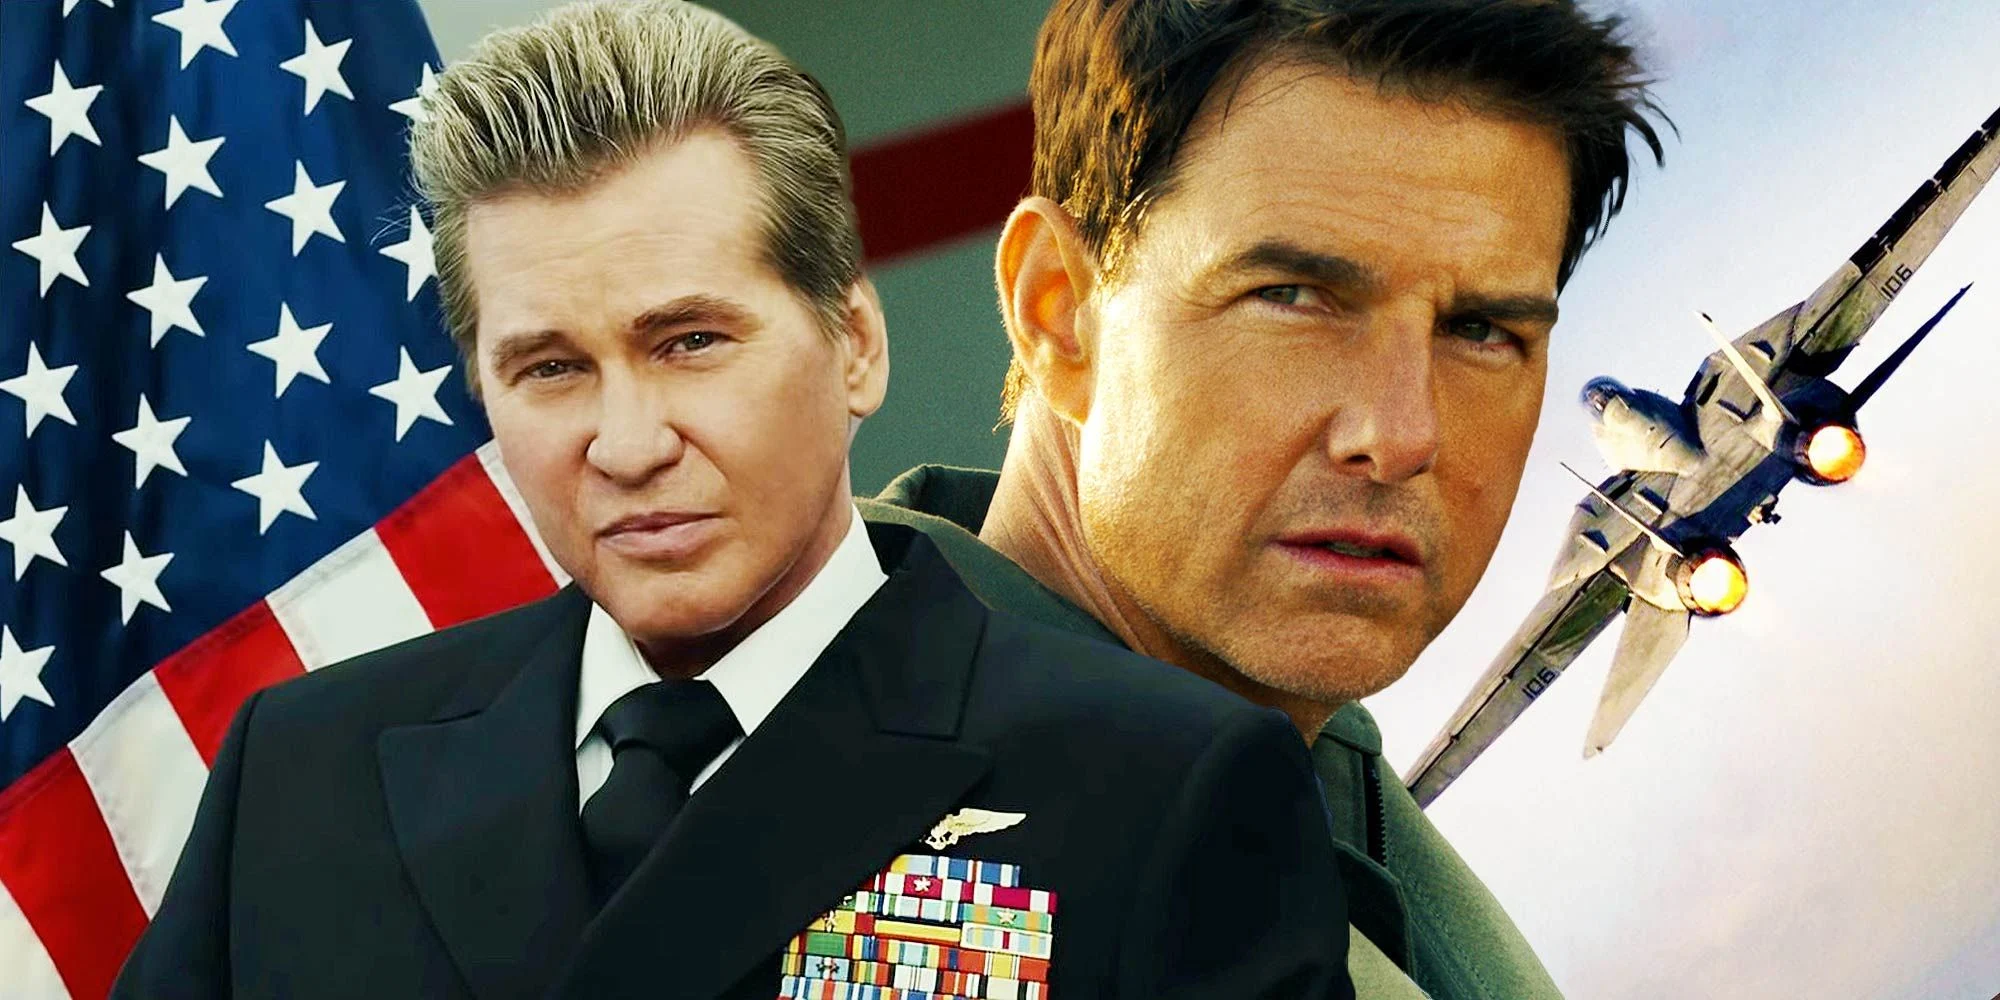 Top Gun Stars Tom Cruise and Val Kilmer beside the American flag and a fighter jet